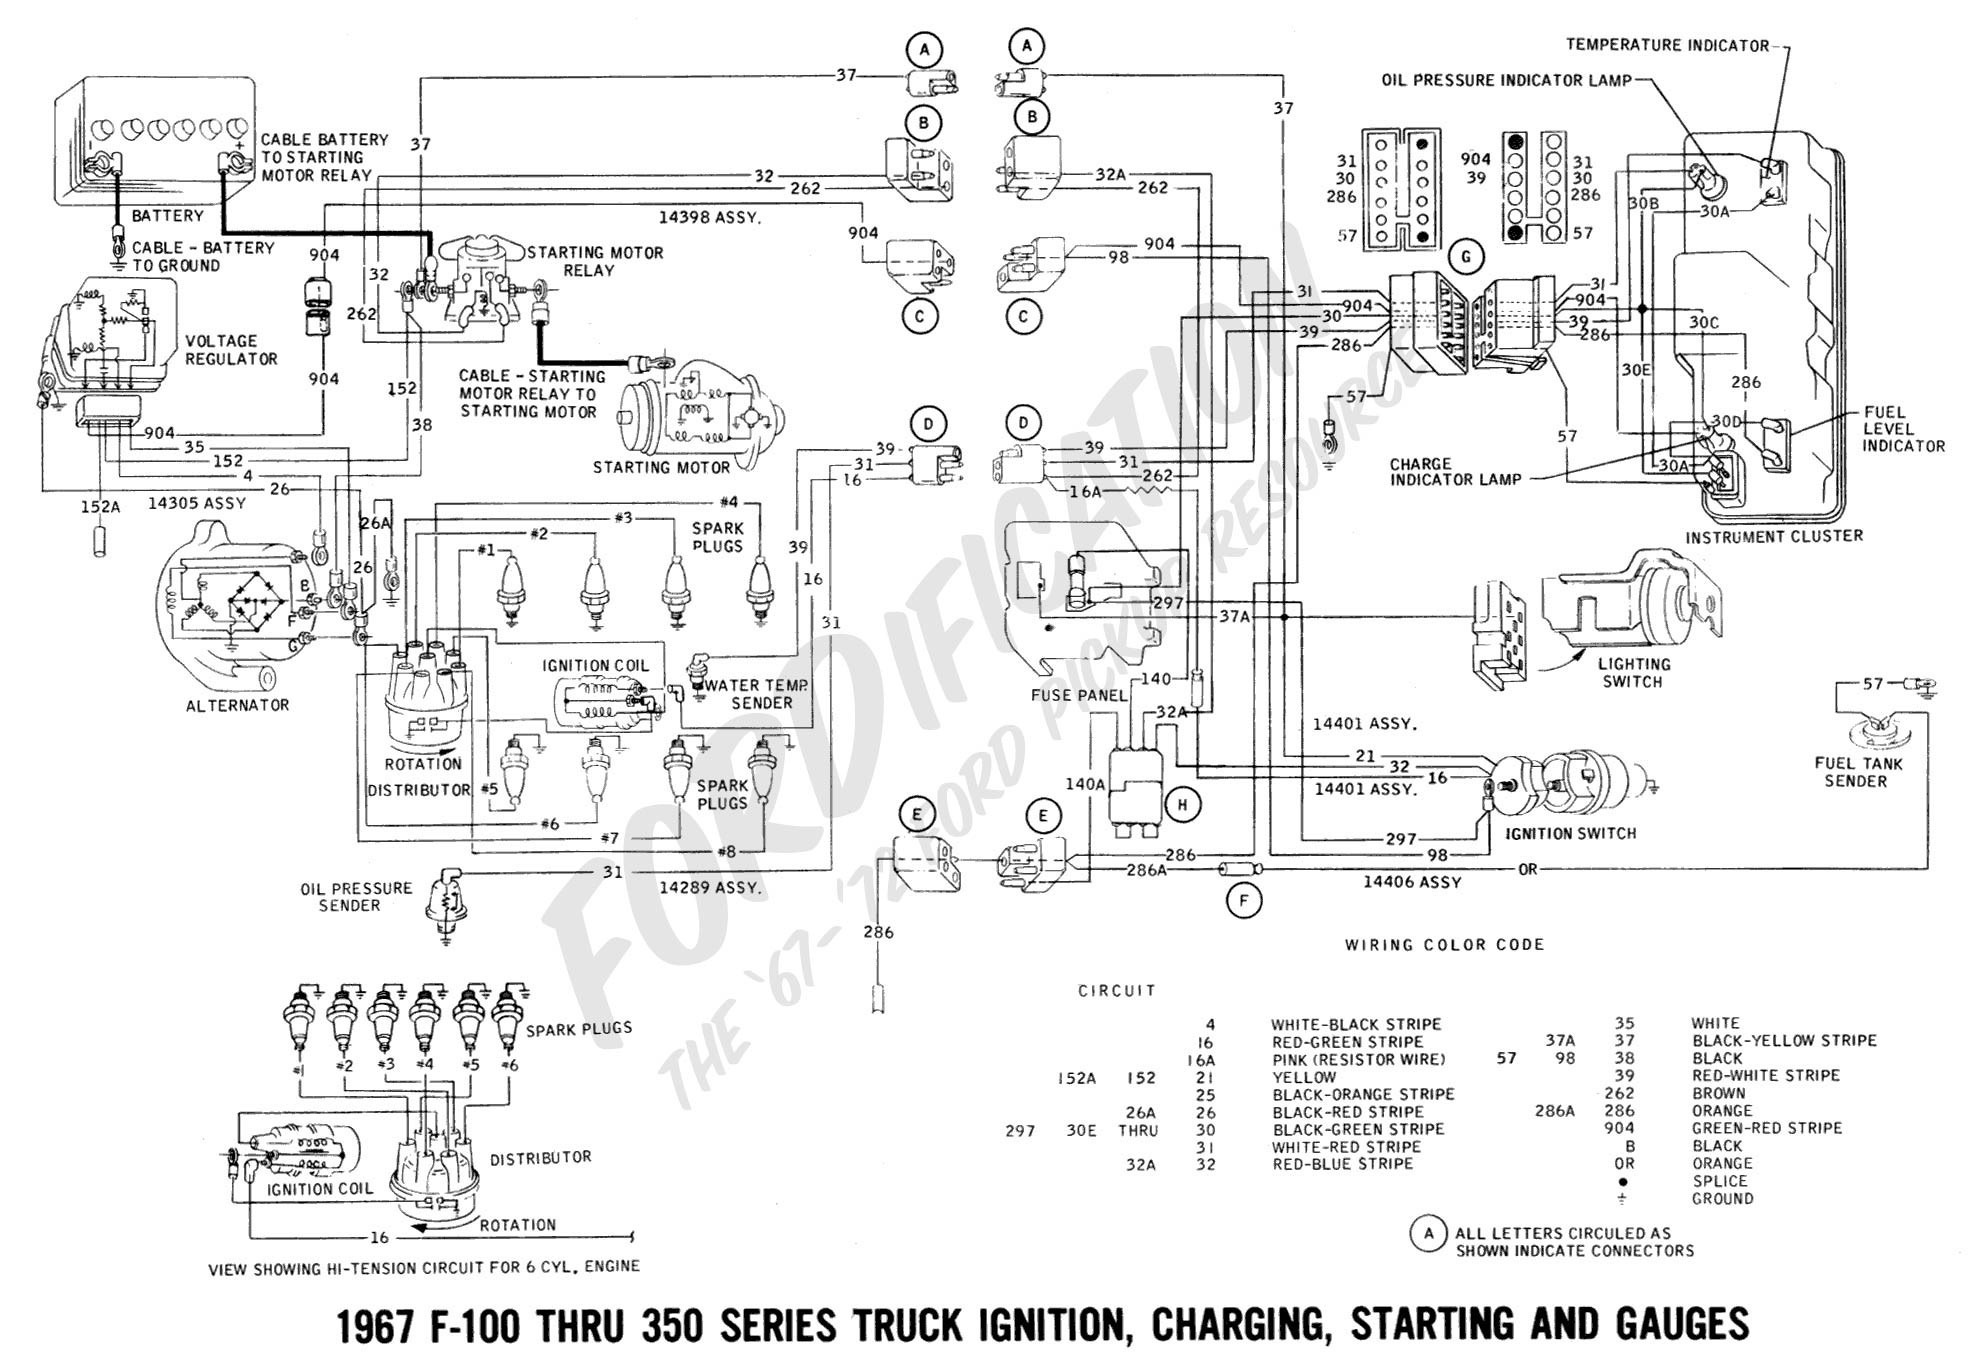 Ford F150 Wiring Diagrams Best Ignition Coil Wiring Diagram Diagram Of Ford F150 Wiring Diagrams